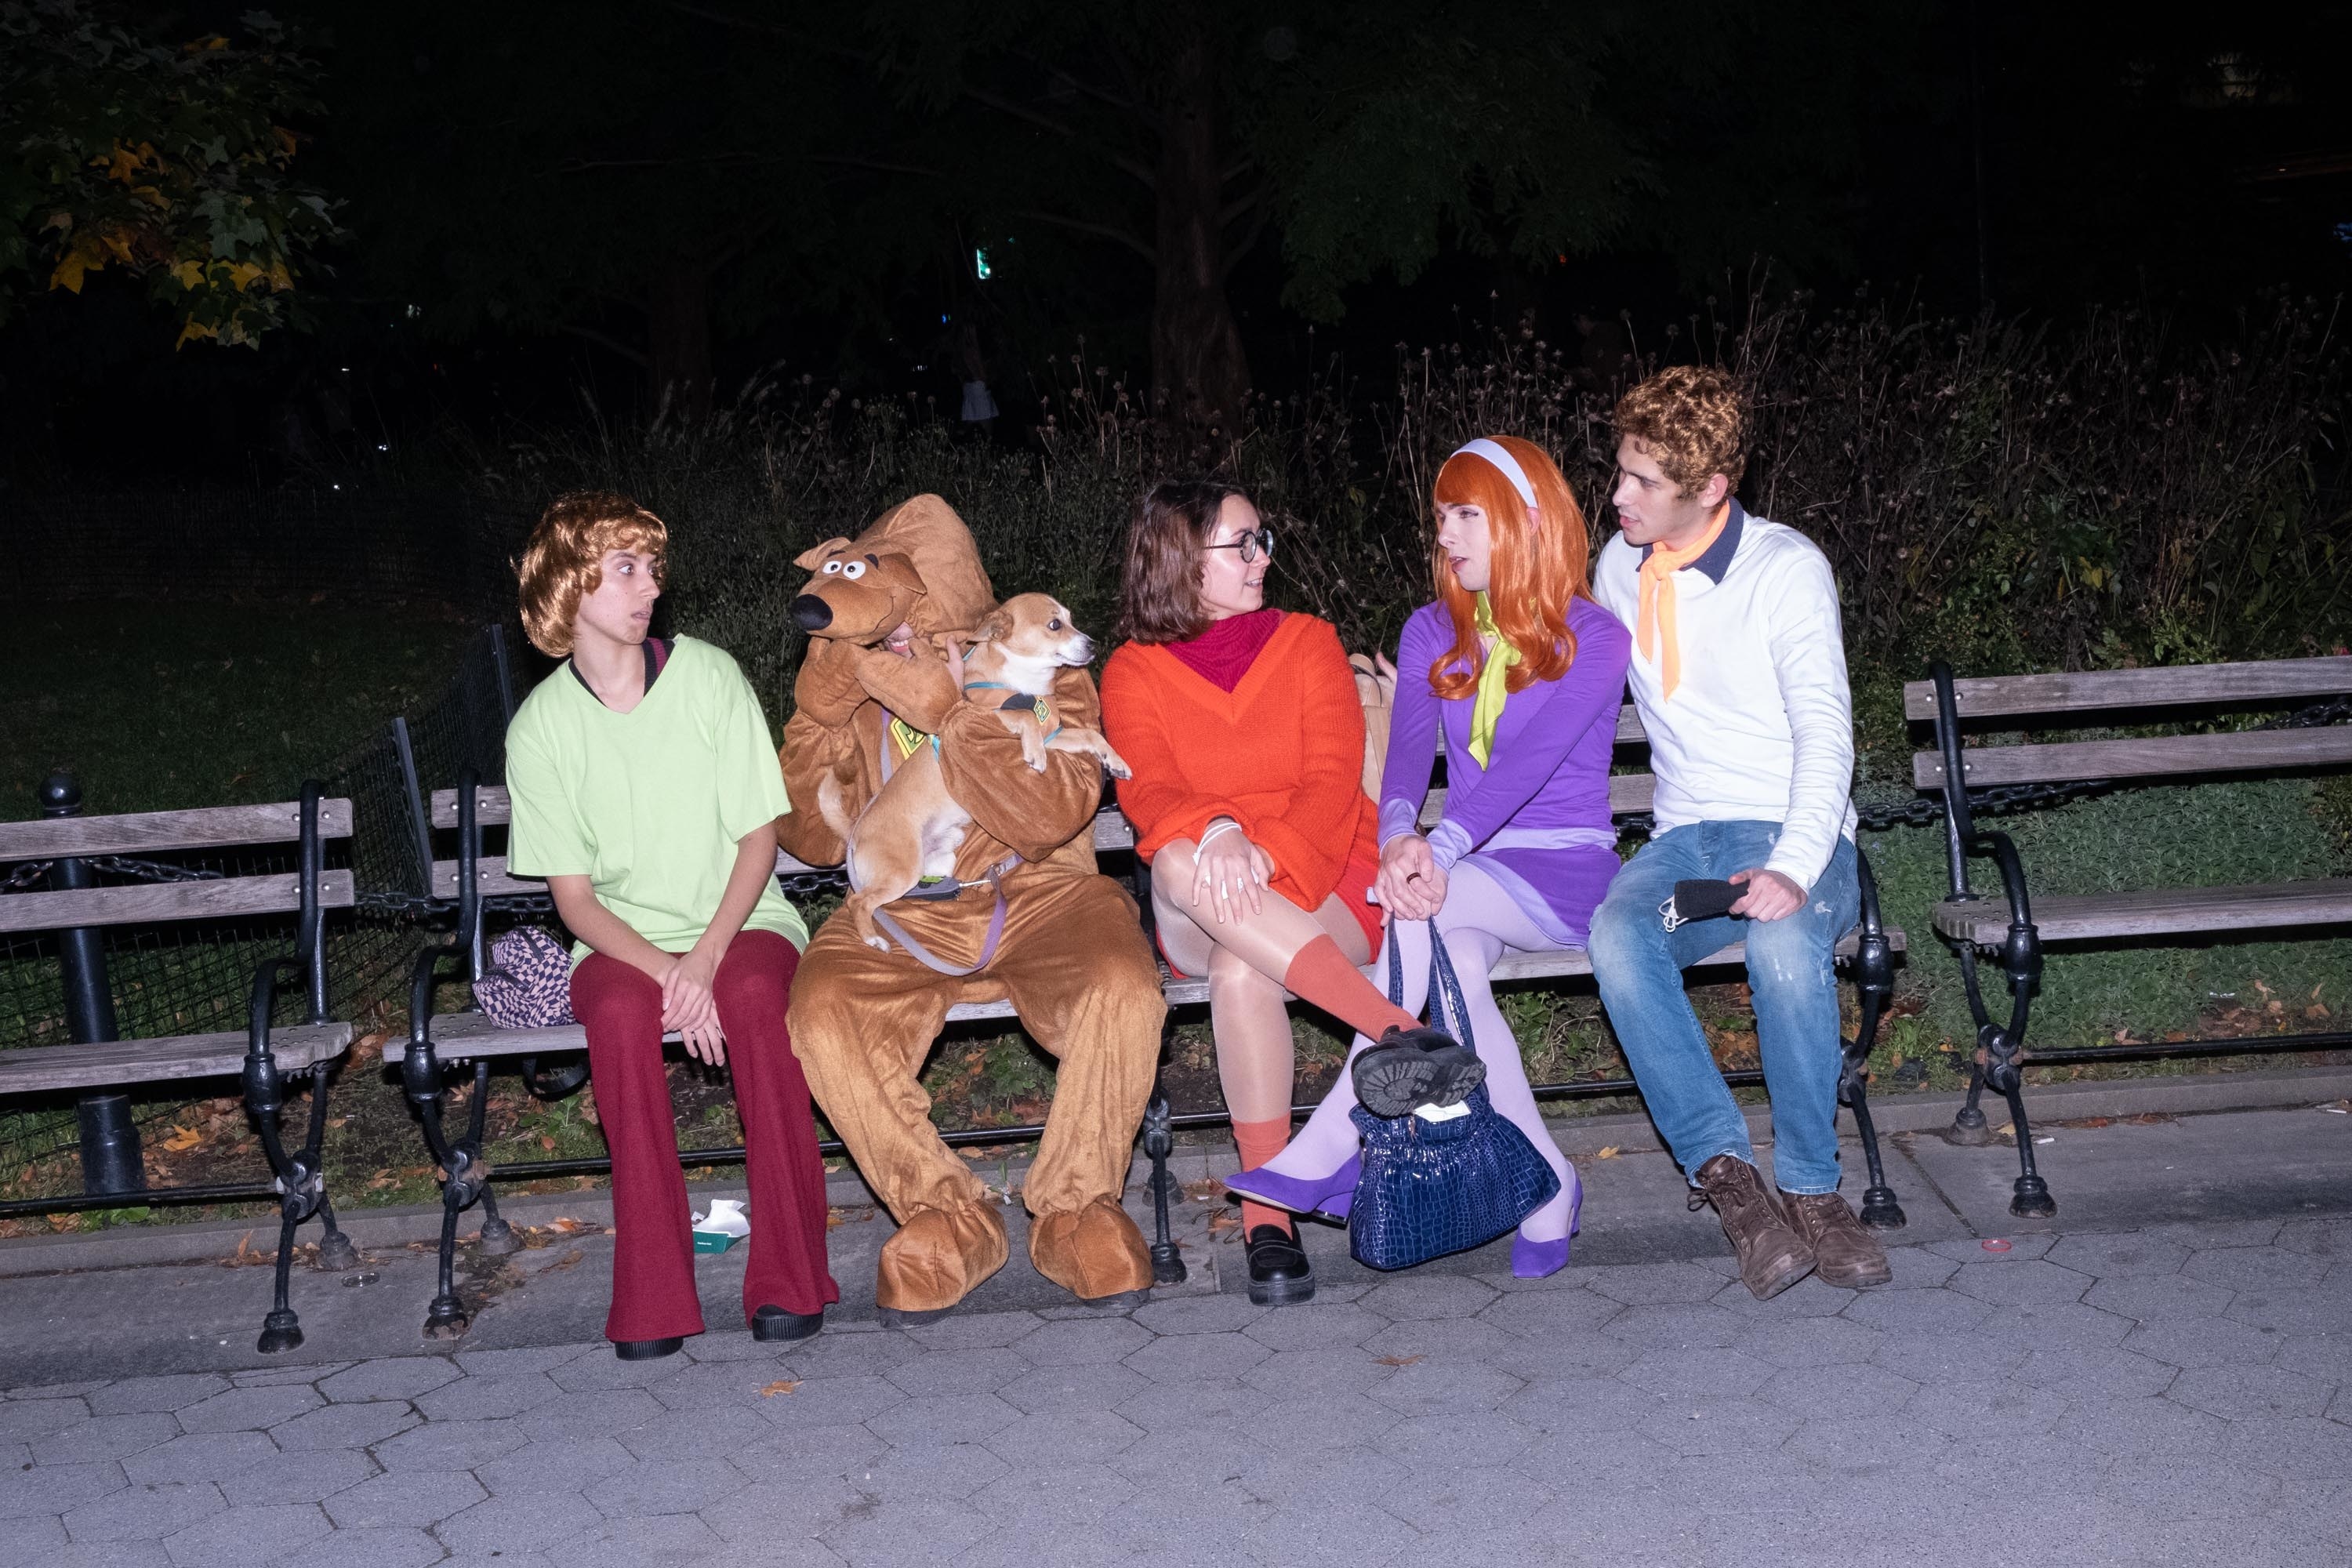 Five people dressed as the Scooby-Doo gang take a seat on a Washington Square Park bench with a small dog